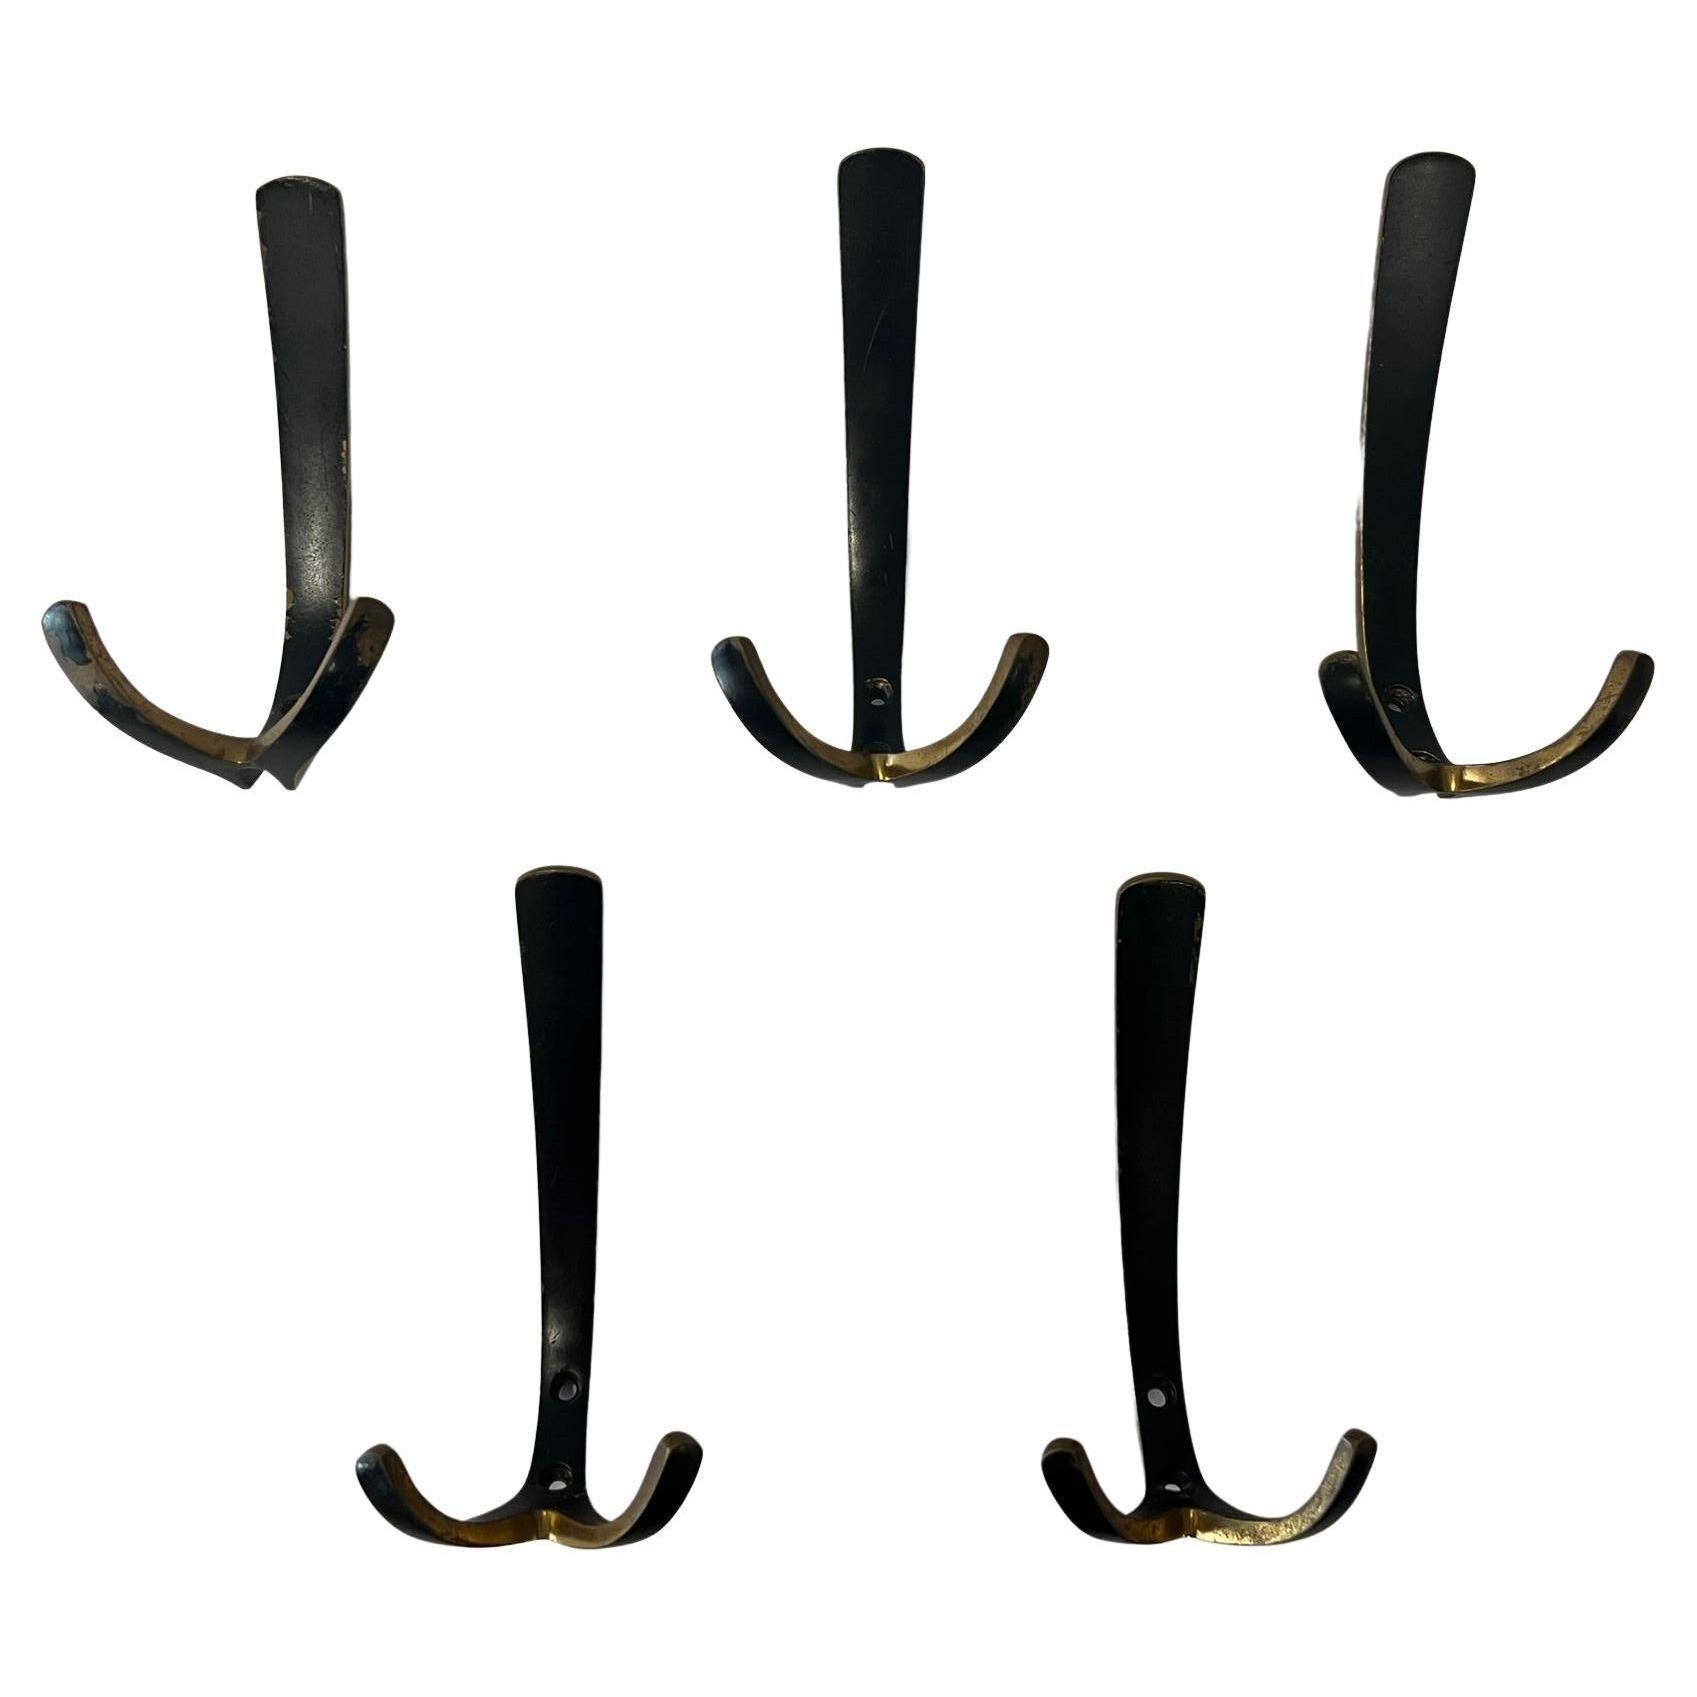 Mid-20th Century Wall Coat Hooks by Herta Baller, Vienna Austria, Set of 5 For Sale